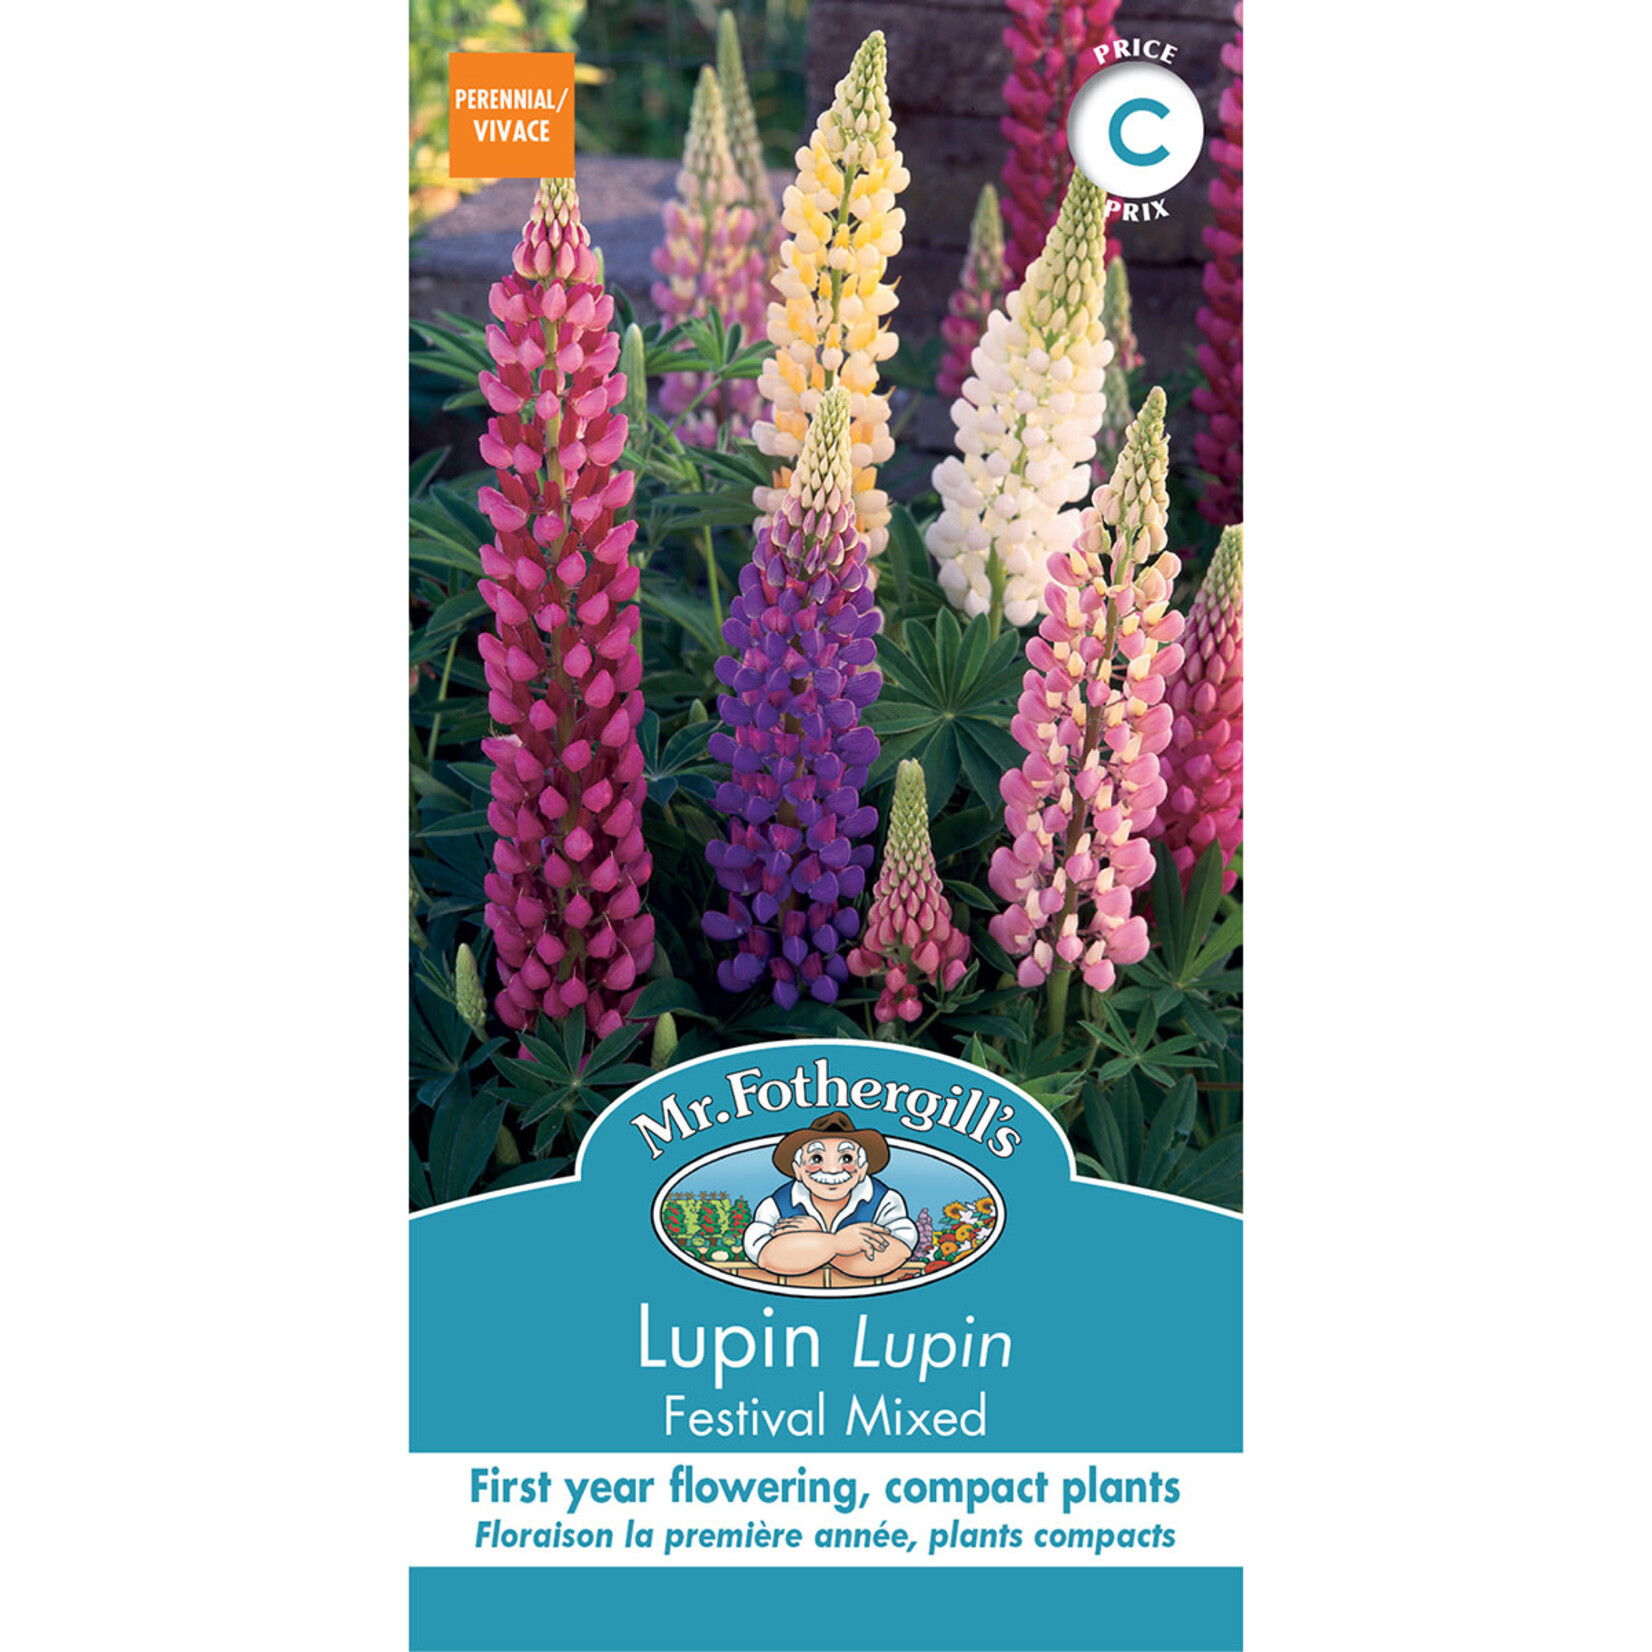 Mr. Fothergill's LUPIN Festival Mixed